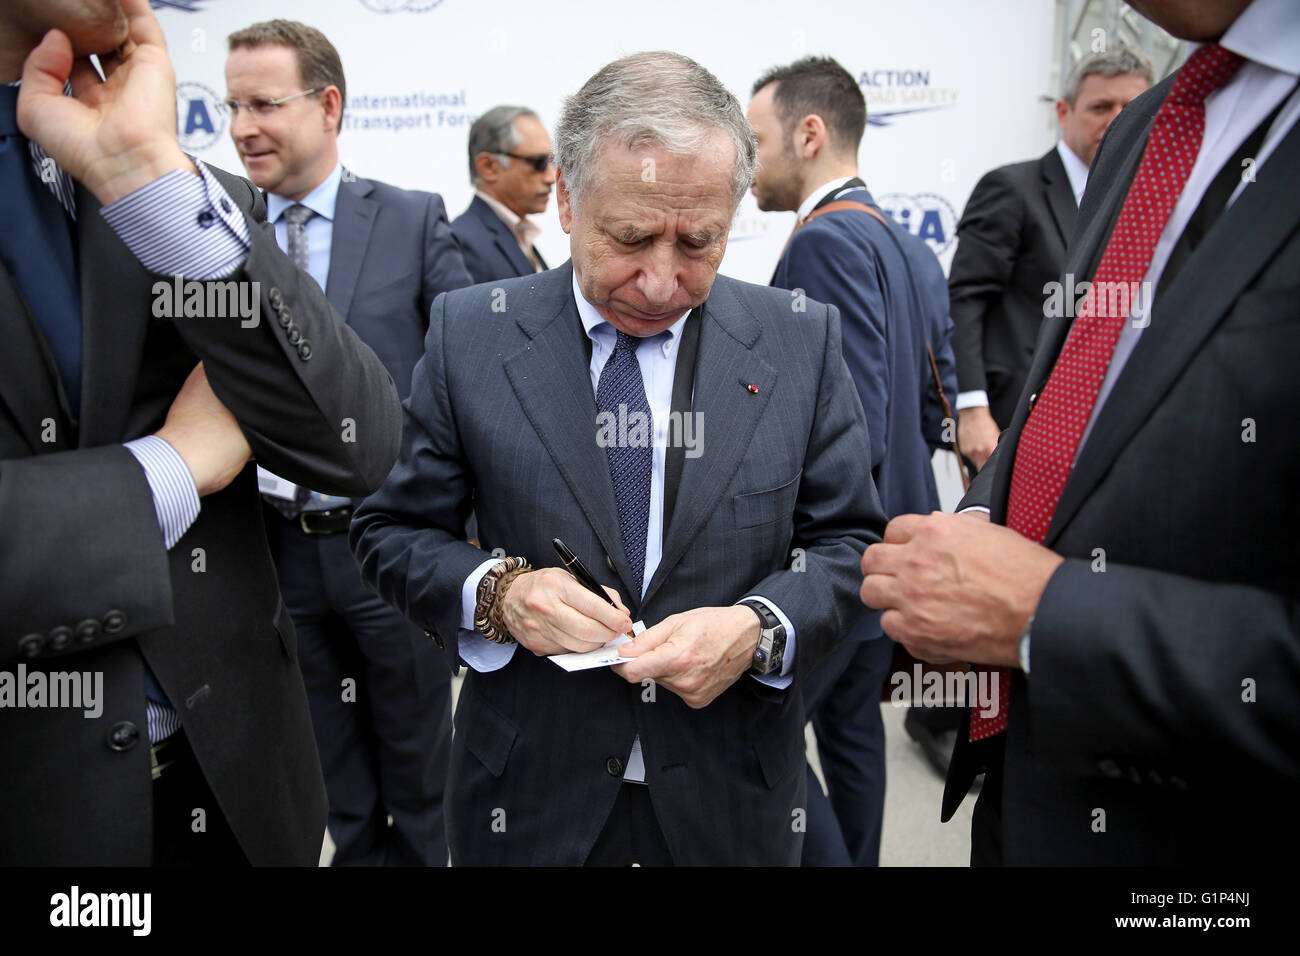 Leipzig, Germany. 18th May, 2016. Jean Todt (C), president of the International Automobile Federation (FIA), seen at the world summit of transport ministers in Leipzig, Germany, 18 May 2016. Some 1,000 participants from 60 countries are expected to attend the three-day summit held by the International Transport Forum of the Organisation for Economic Co-operation and Development (OECD). Photo: JAN WOITAS/dpa/Alamy Live News Stock Photo